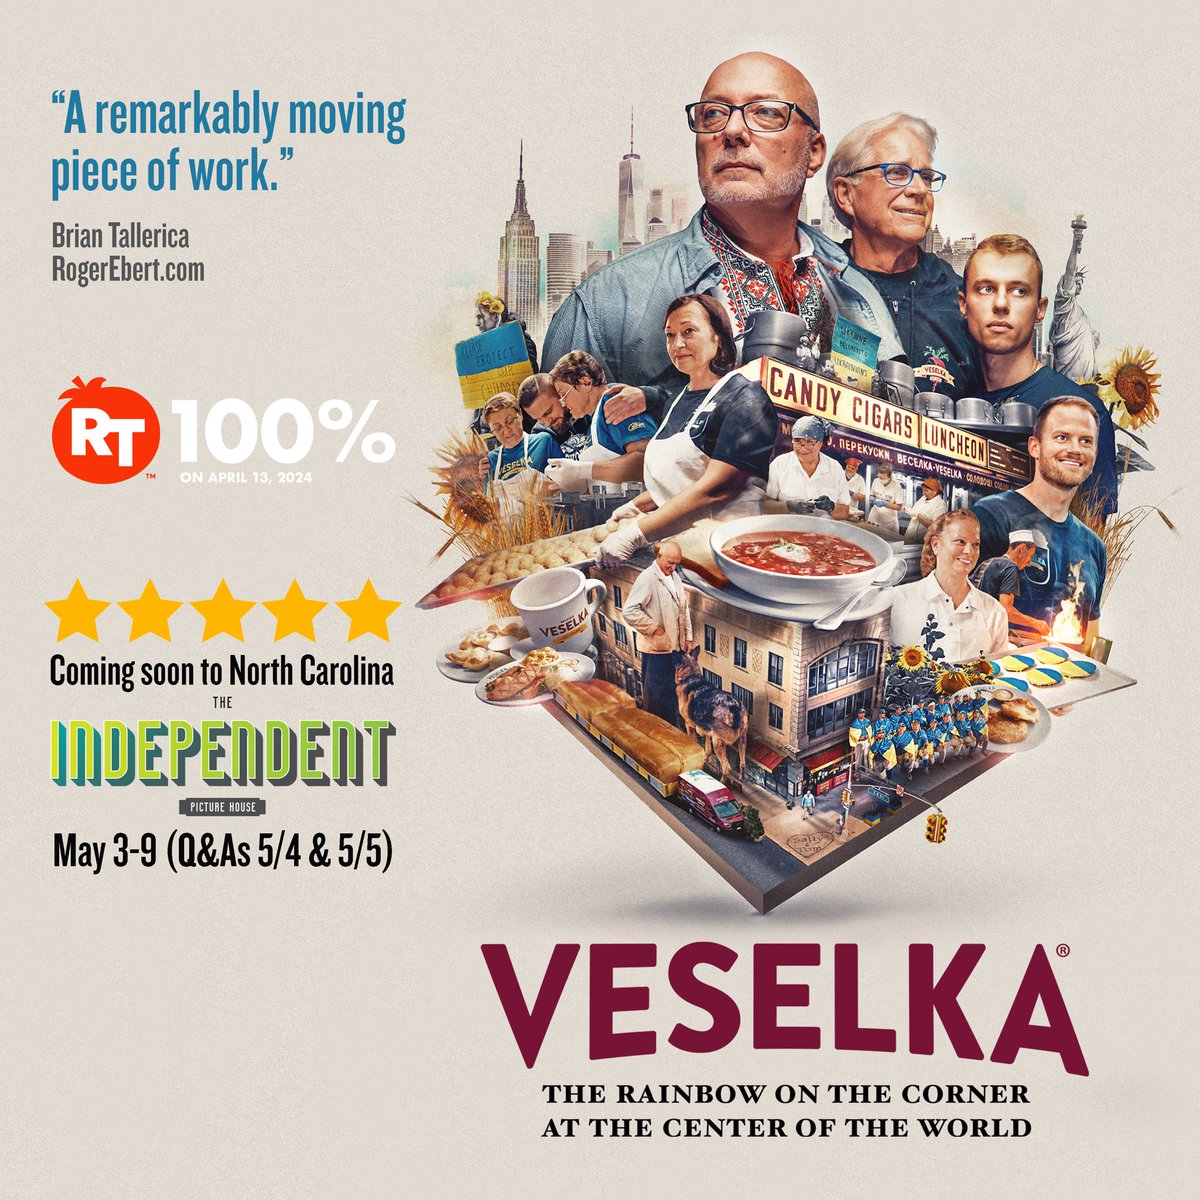 May 3-9 @veselkamovie will play in Charlotte, NC at The Independent Picture House (@IPH_clt). Q&As with writer/director Michael Fiore are on sale (5/4 at 7pm; 5/5 at 1pm)! Other showtimes TBA! See the @veselkanyc story on the big screen! Tix: independentpicturehouse.org/movies/veselka…